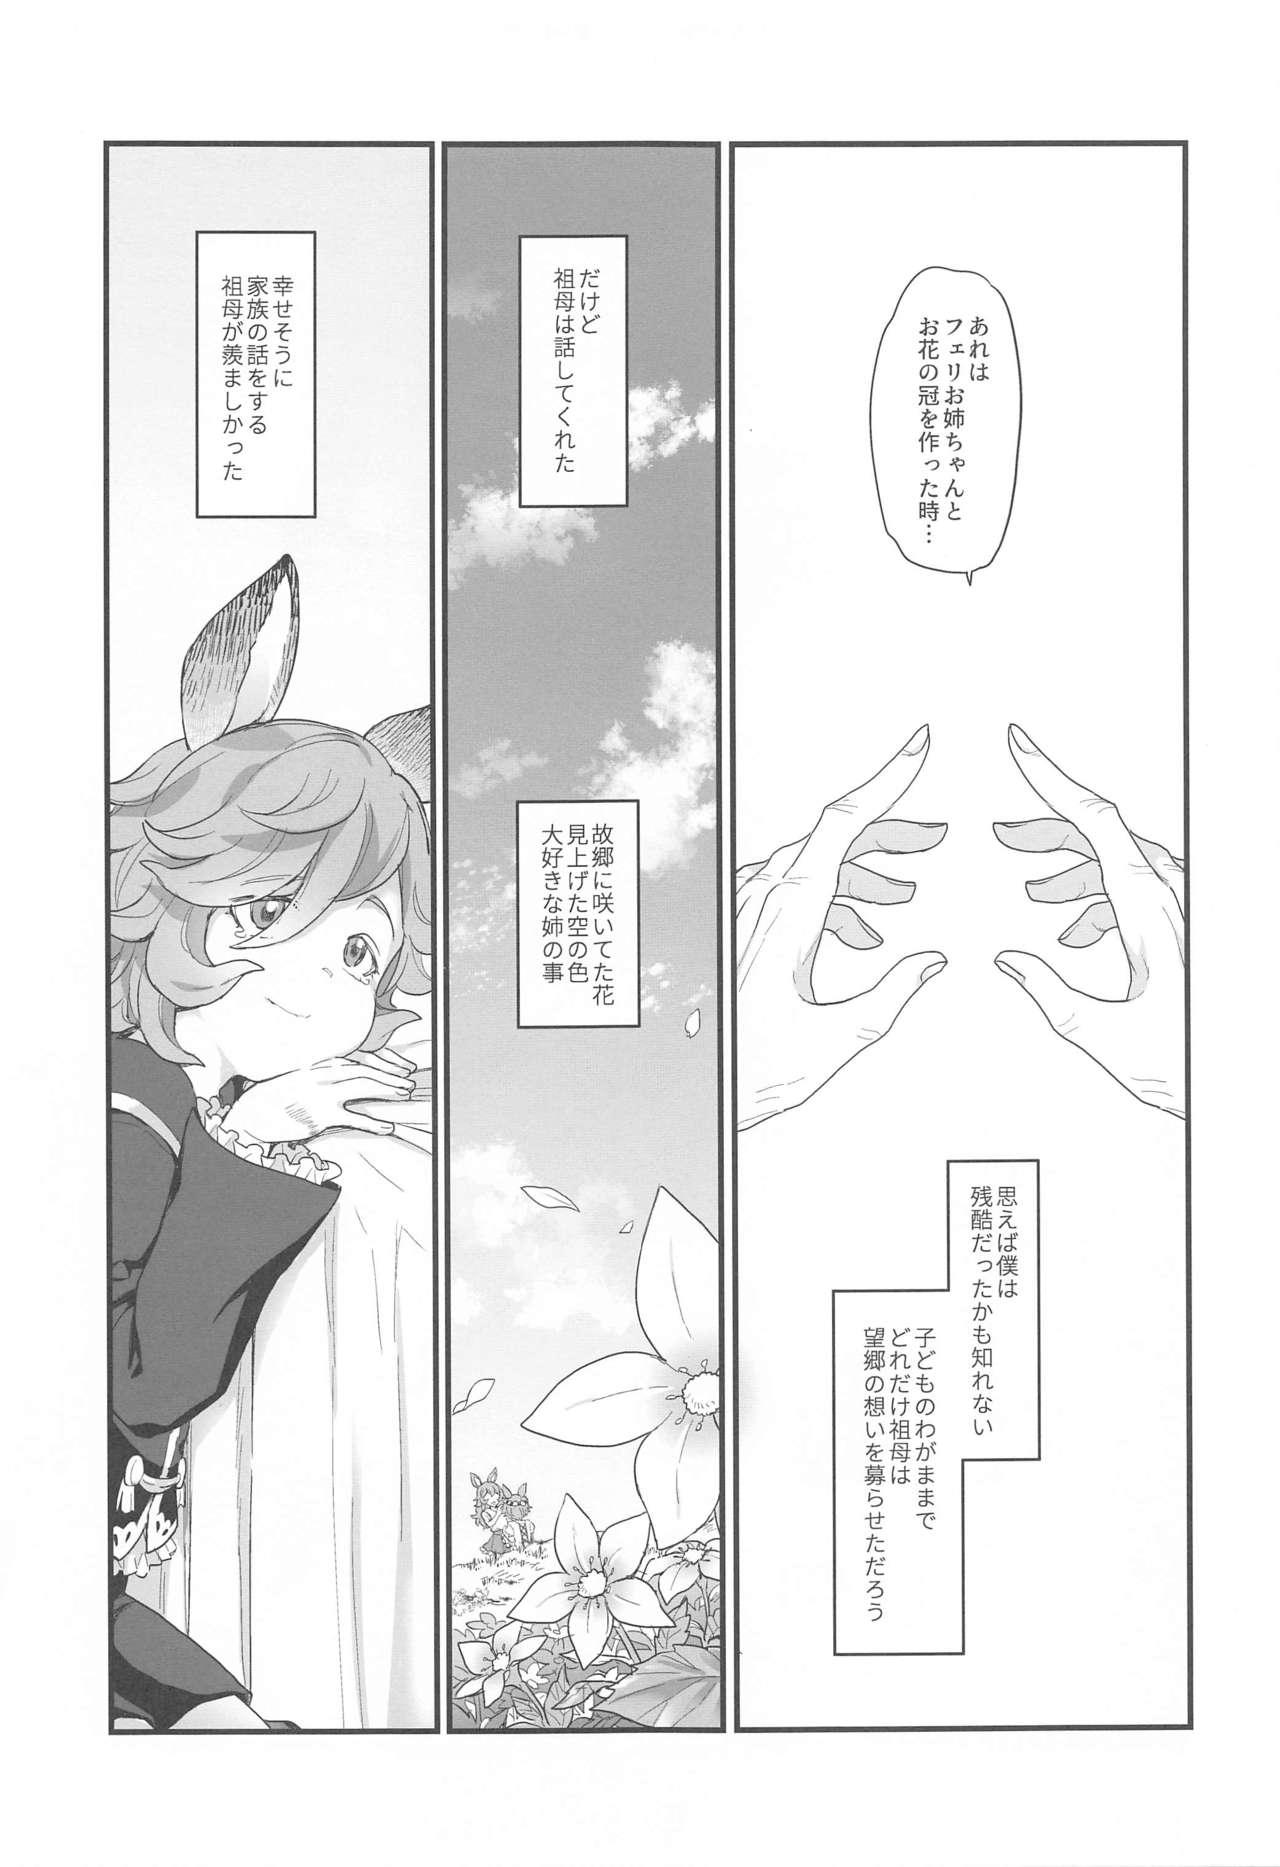 Cheating NOW I KNOW - Granblue fantasy Couple Sex - Page 6